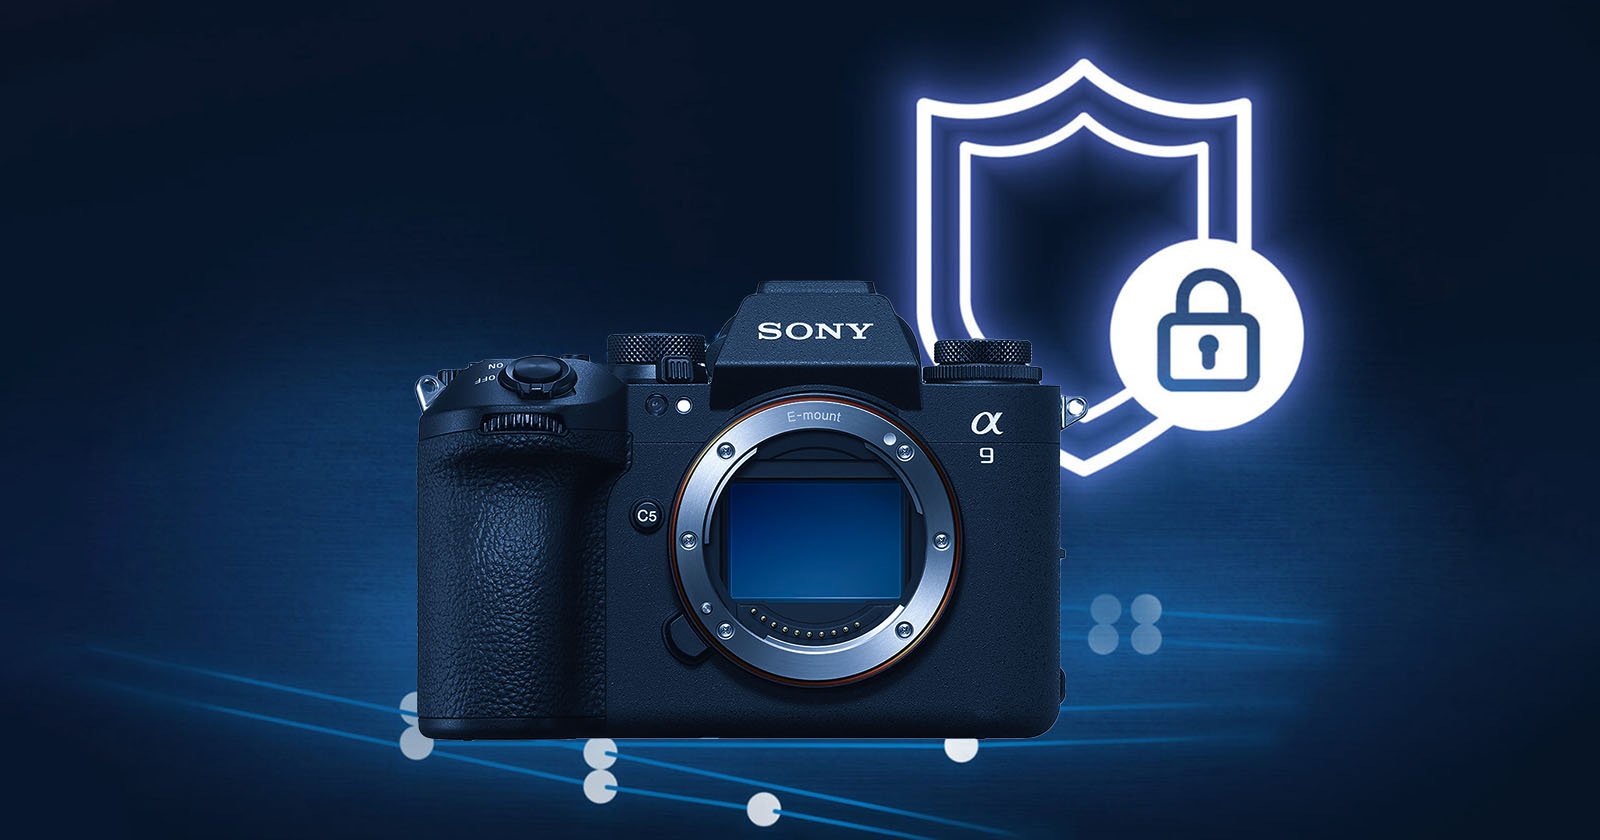  sony in-camera authentication technology passes tests 